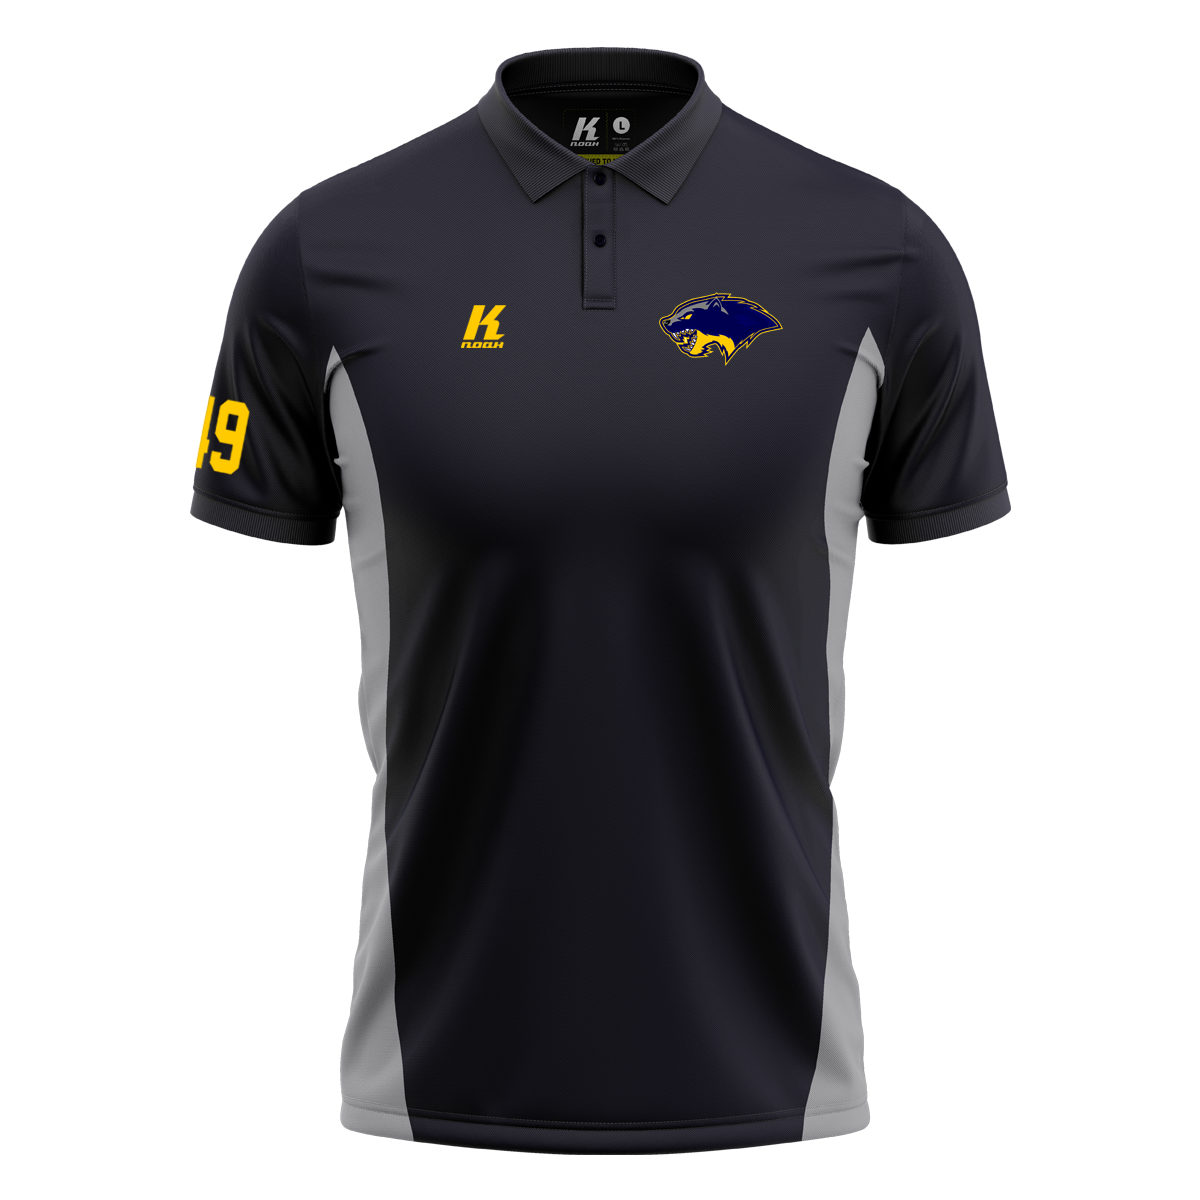 Wolverines K.Tech-Fiber Polo “Gameday” with Playernumber/Initials